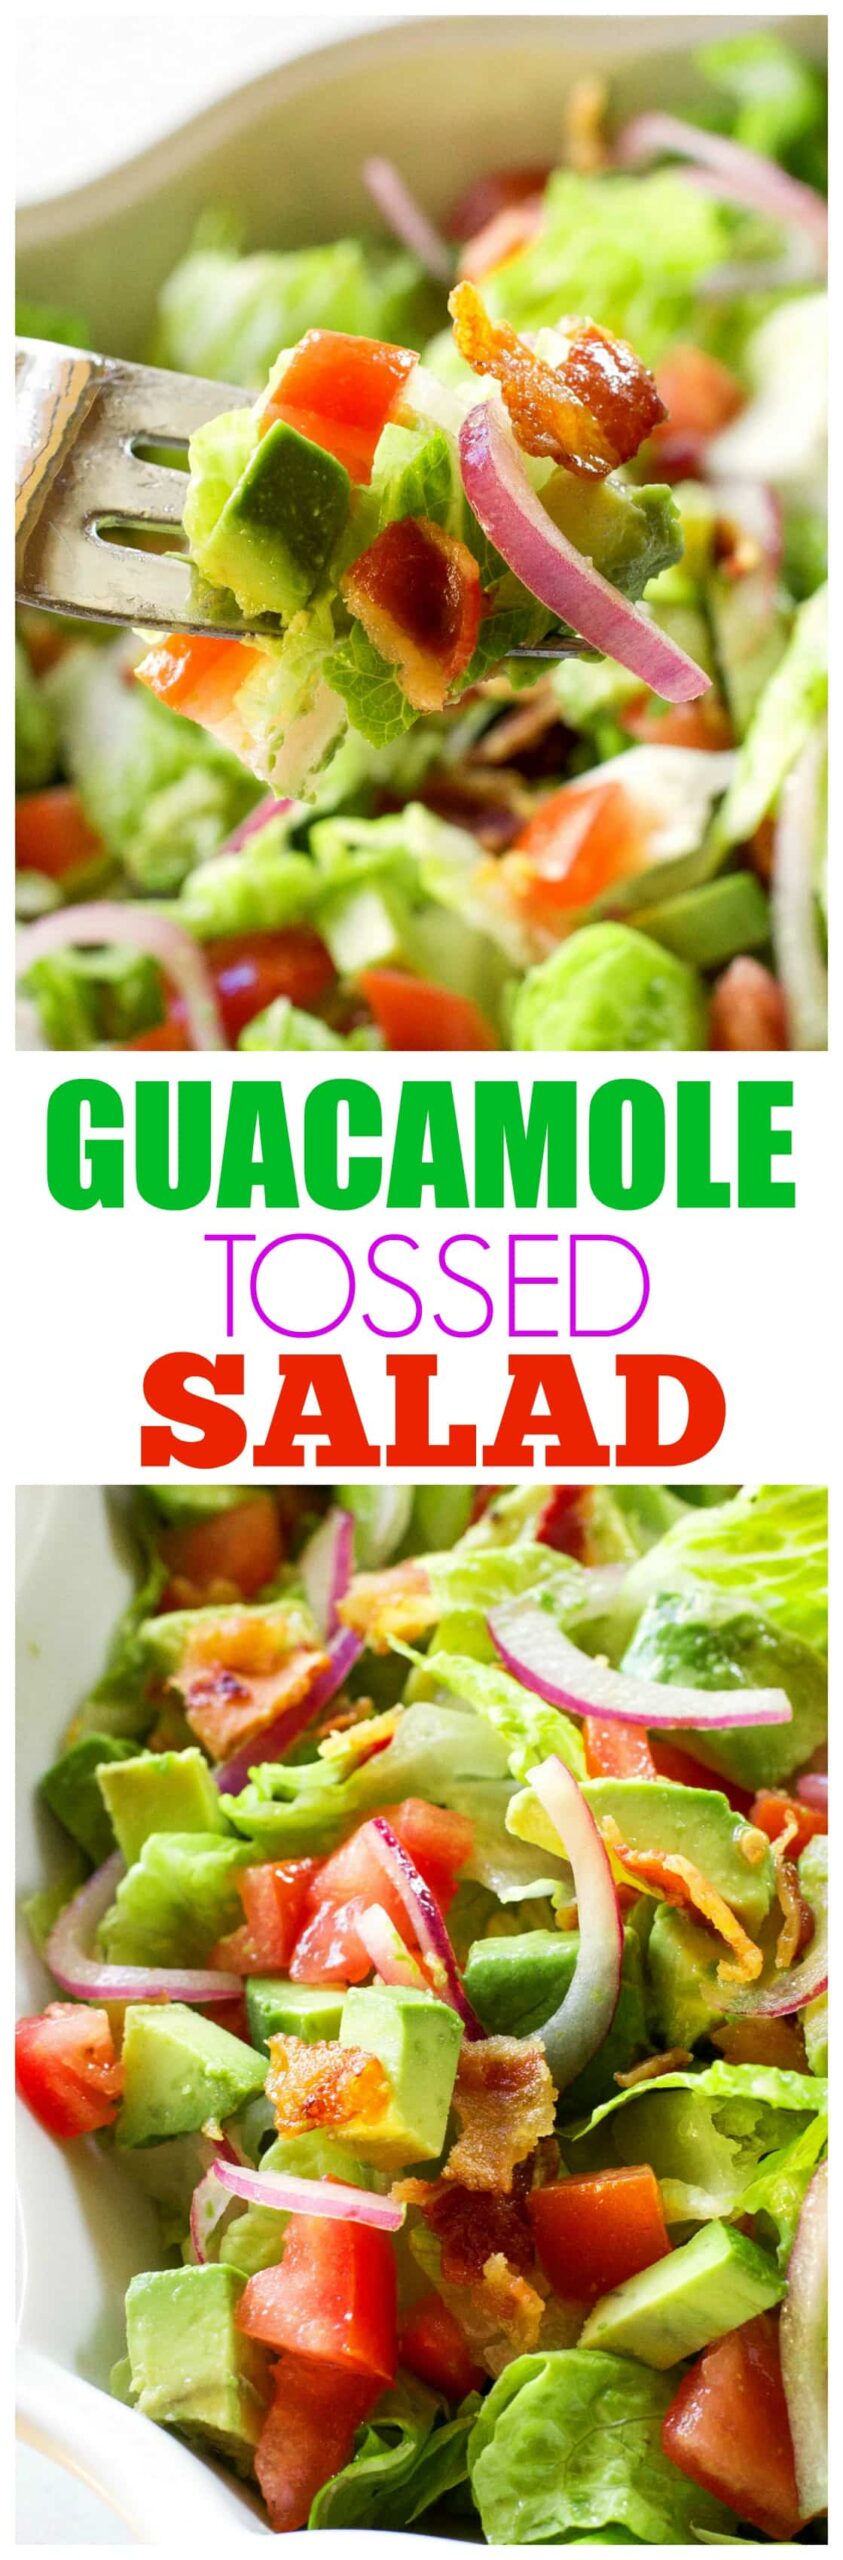 Guacamole Salad - I'm always looking for an easy salad to serve with my Mexican dishes and this is it! Honestly, you will lick the bowl. #guacamole #tossed #salad #mexican #recipe